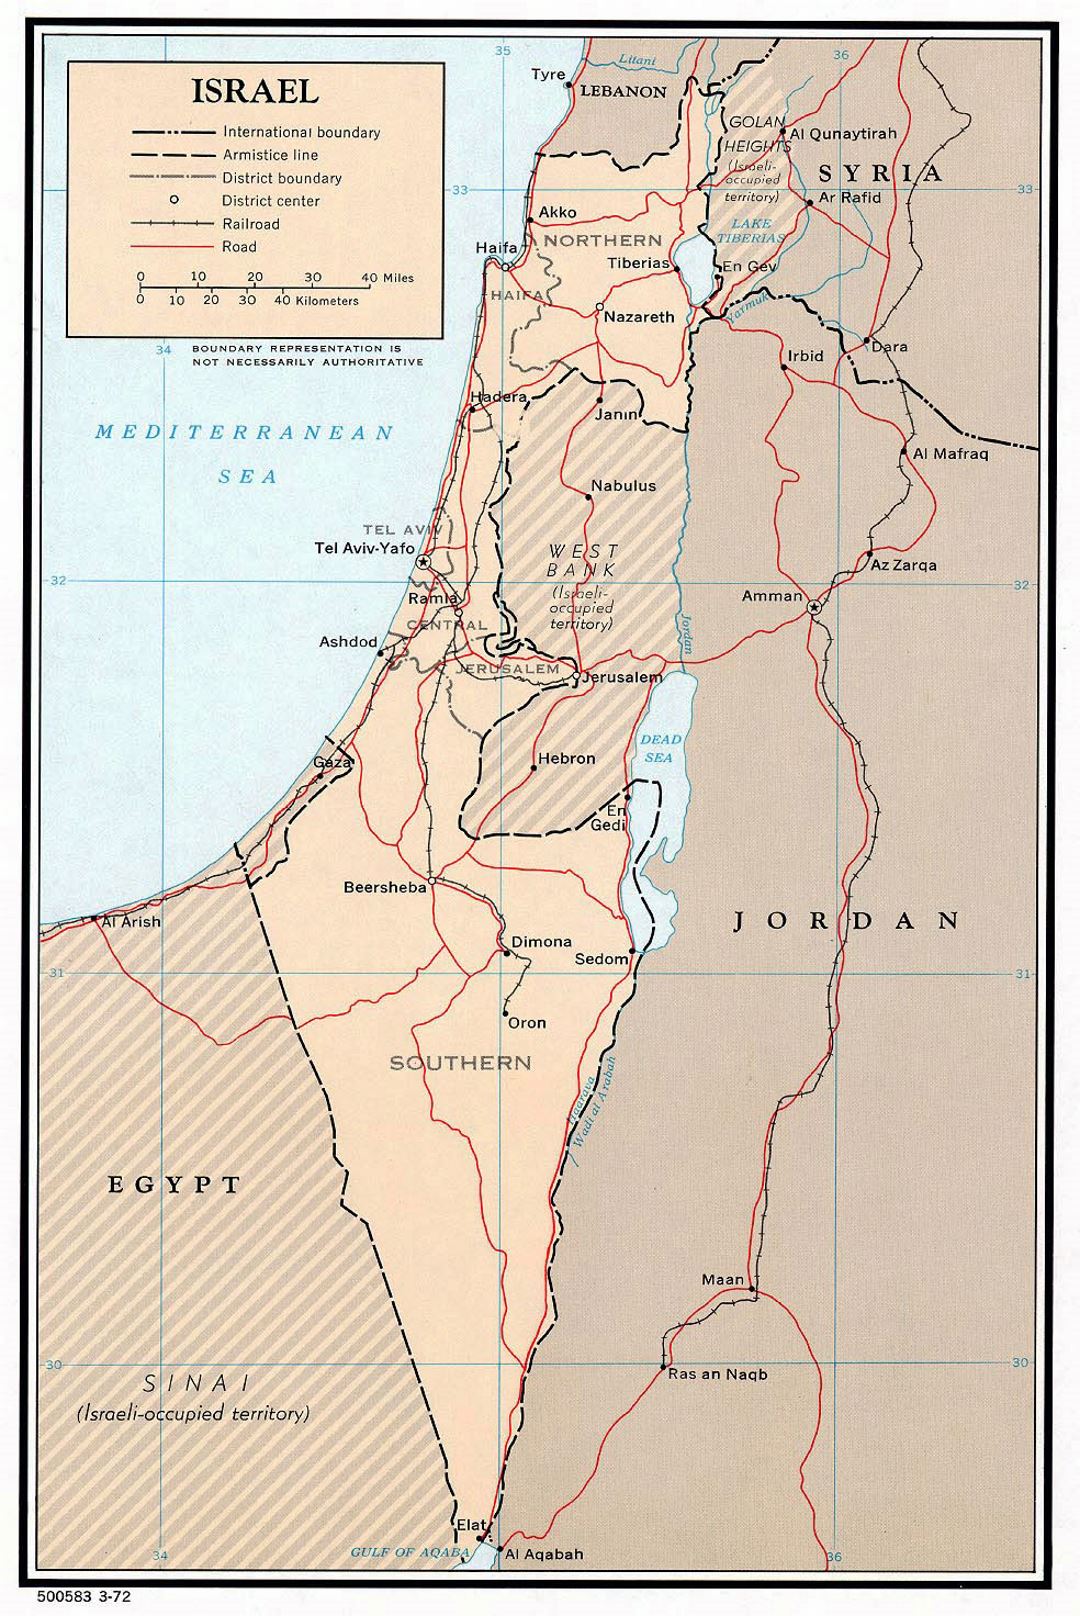 Detailed political and administrative map of Israel with roads, railroads and major cities - 1972